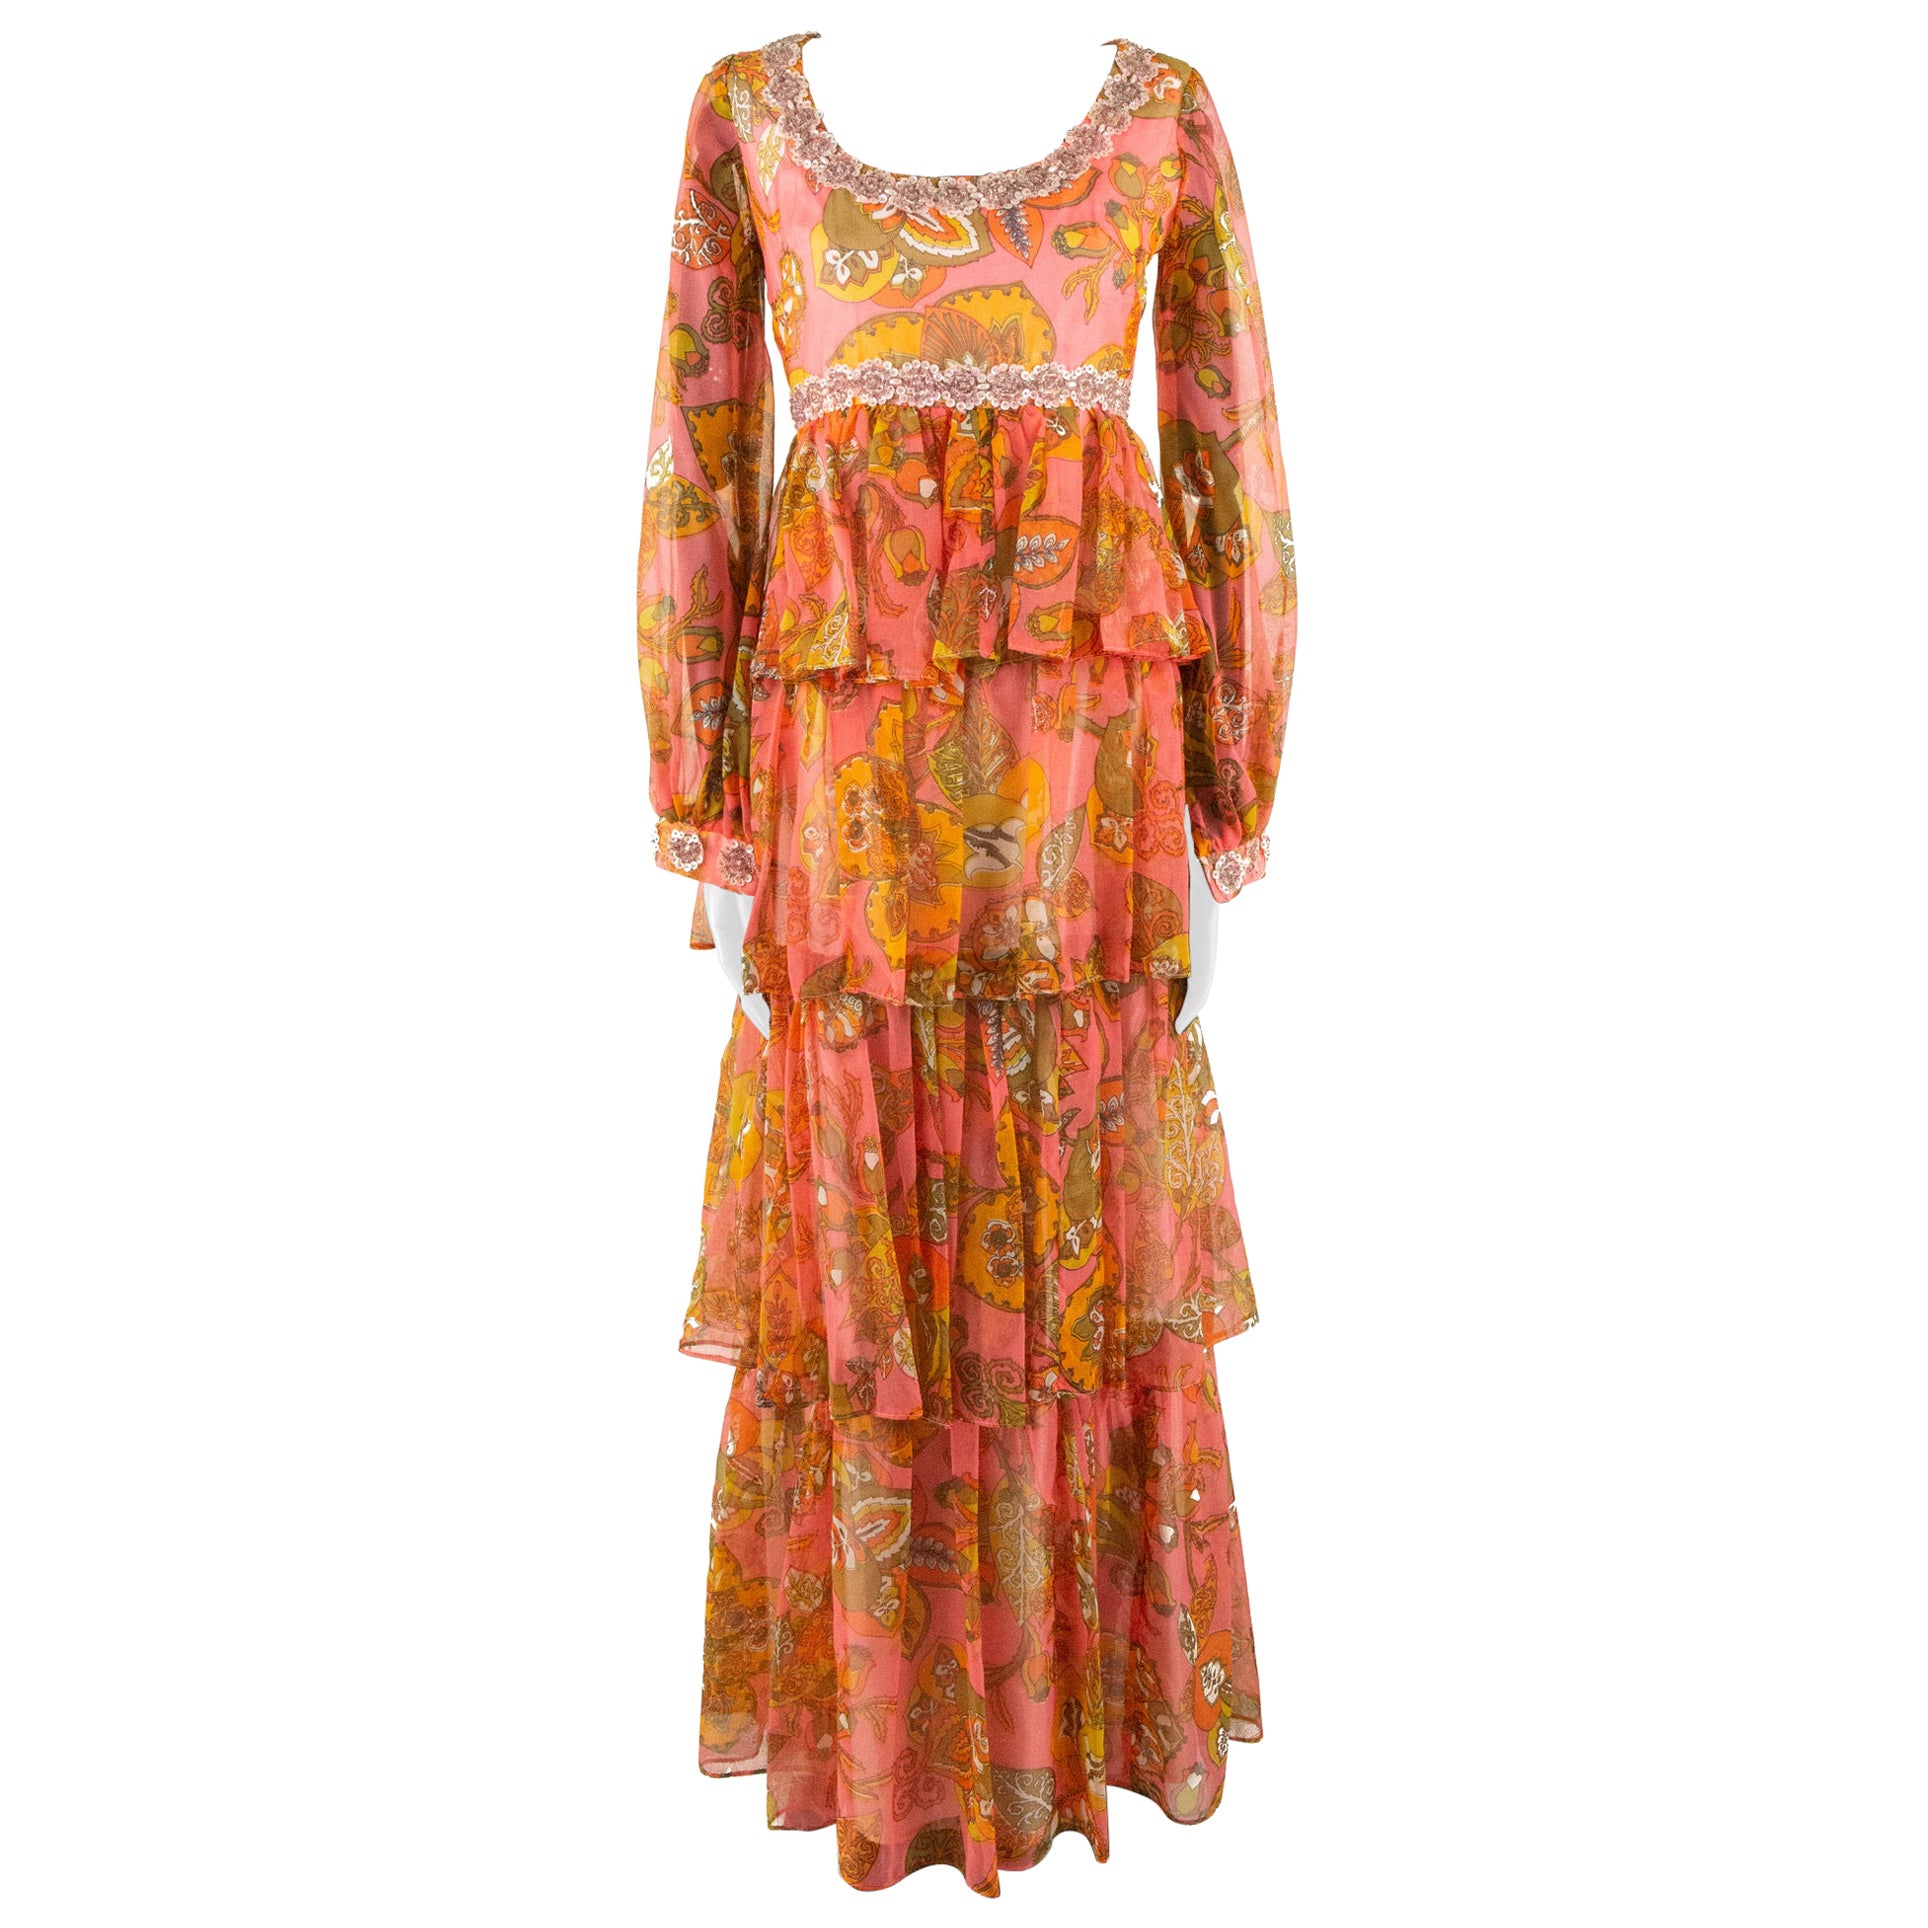 1970s Pauline Coral Psychedelic Print Dress